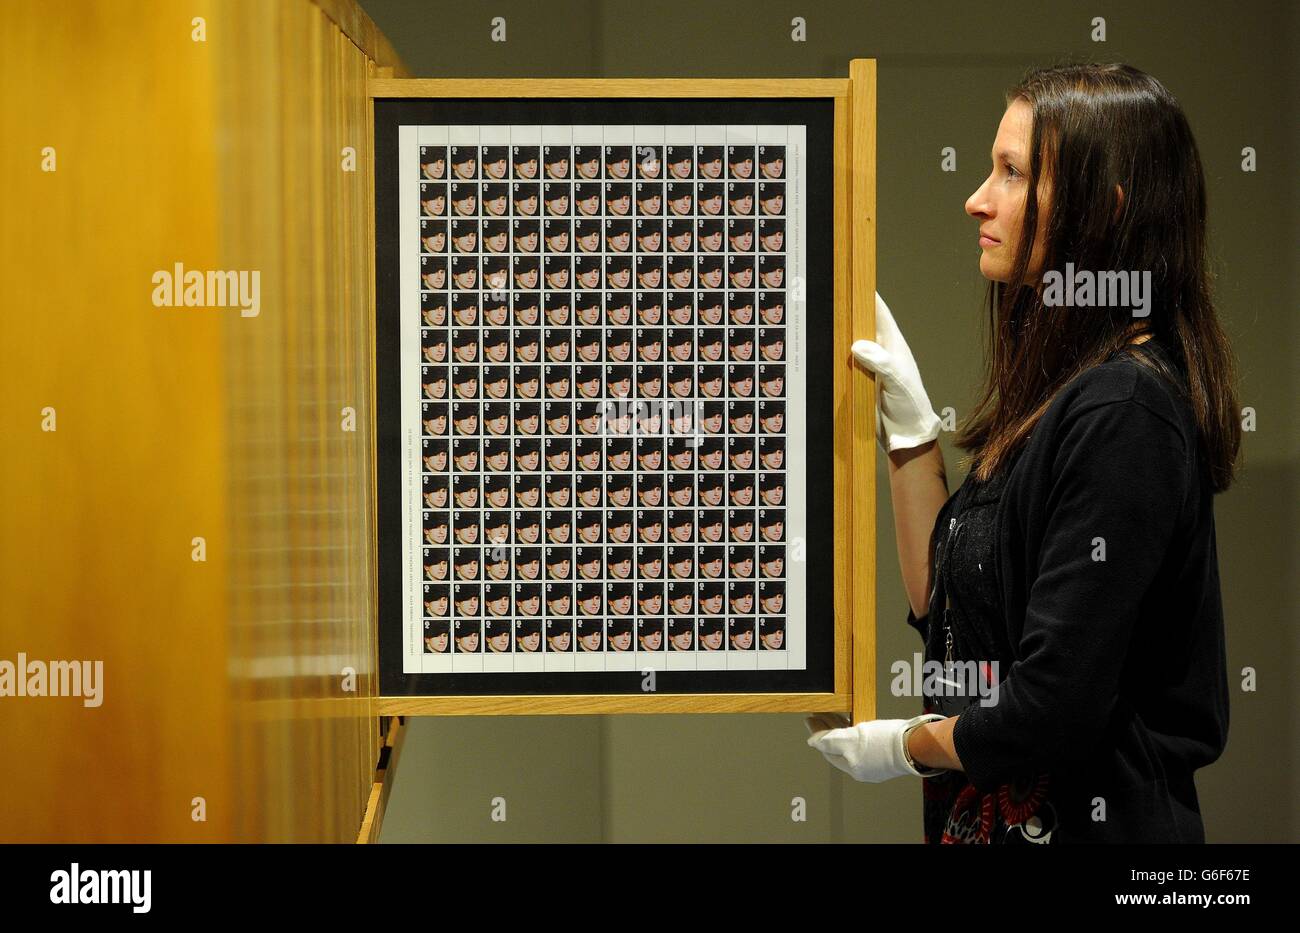 Samantha Howard from The Imperial War Museum North, views stamps bearing pictures of Lance Corporal Thomas Keys, killed in Iraq from Steve McQueen's 'Queen and Country' installation, during a press viewing of the exhibition Catalyst: Contemporary Art and War, which runs from the 12 October 2013 - 23 February 2014, at the IWM North. Stock Photo